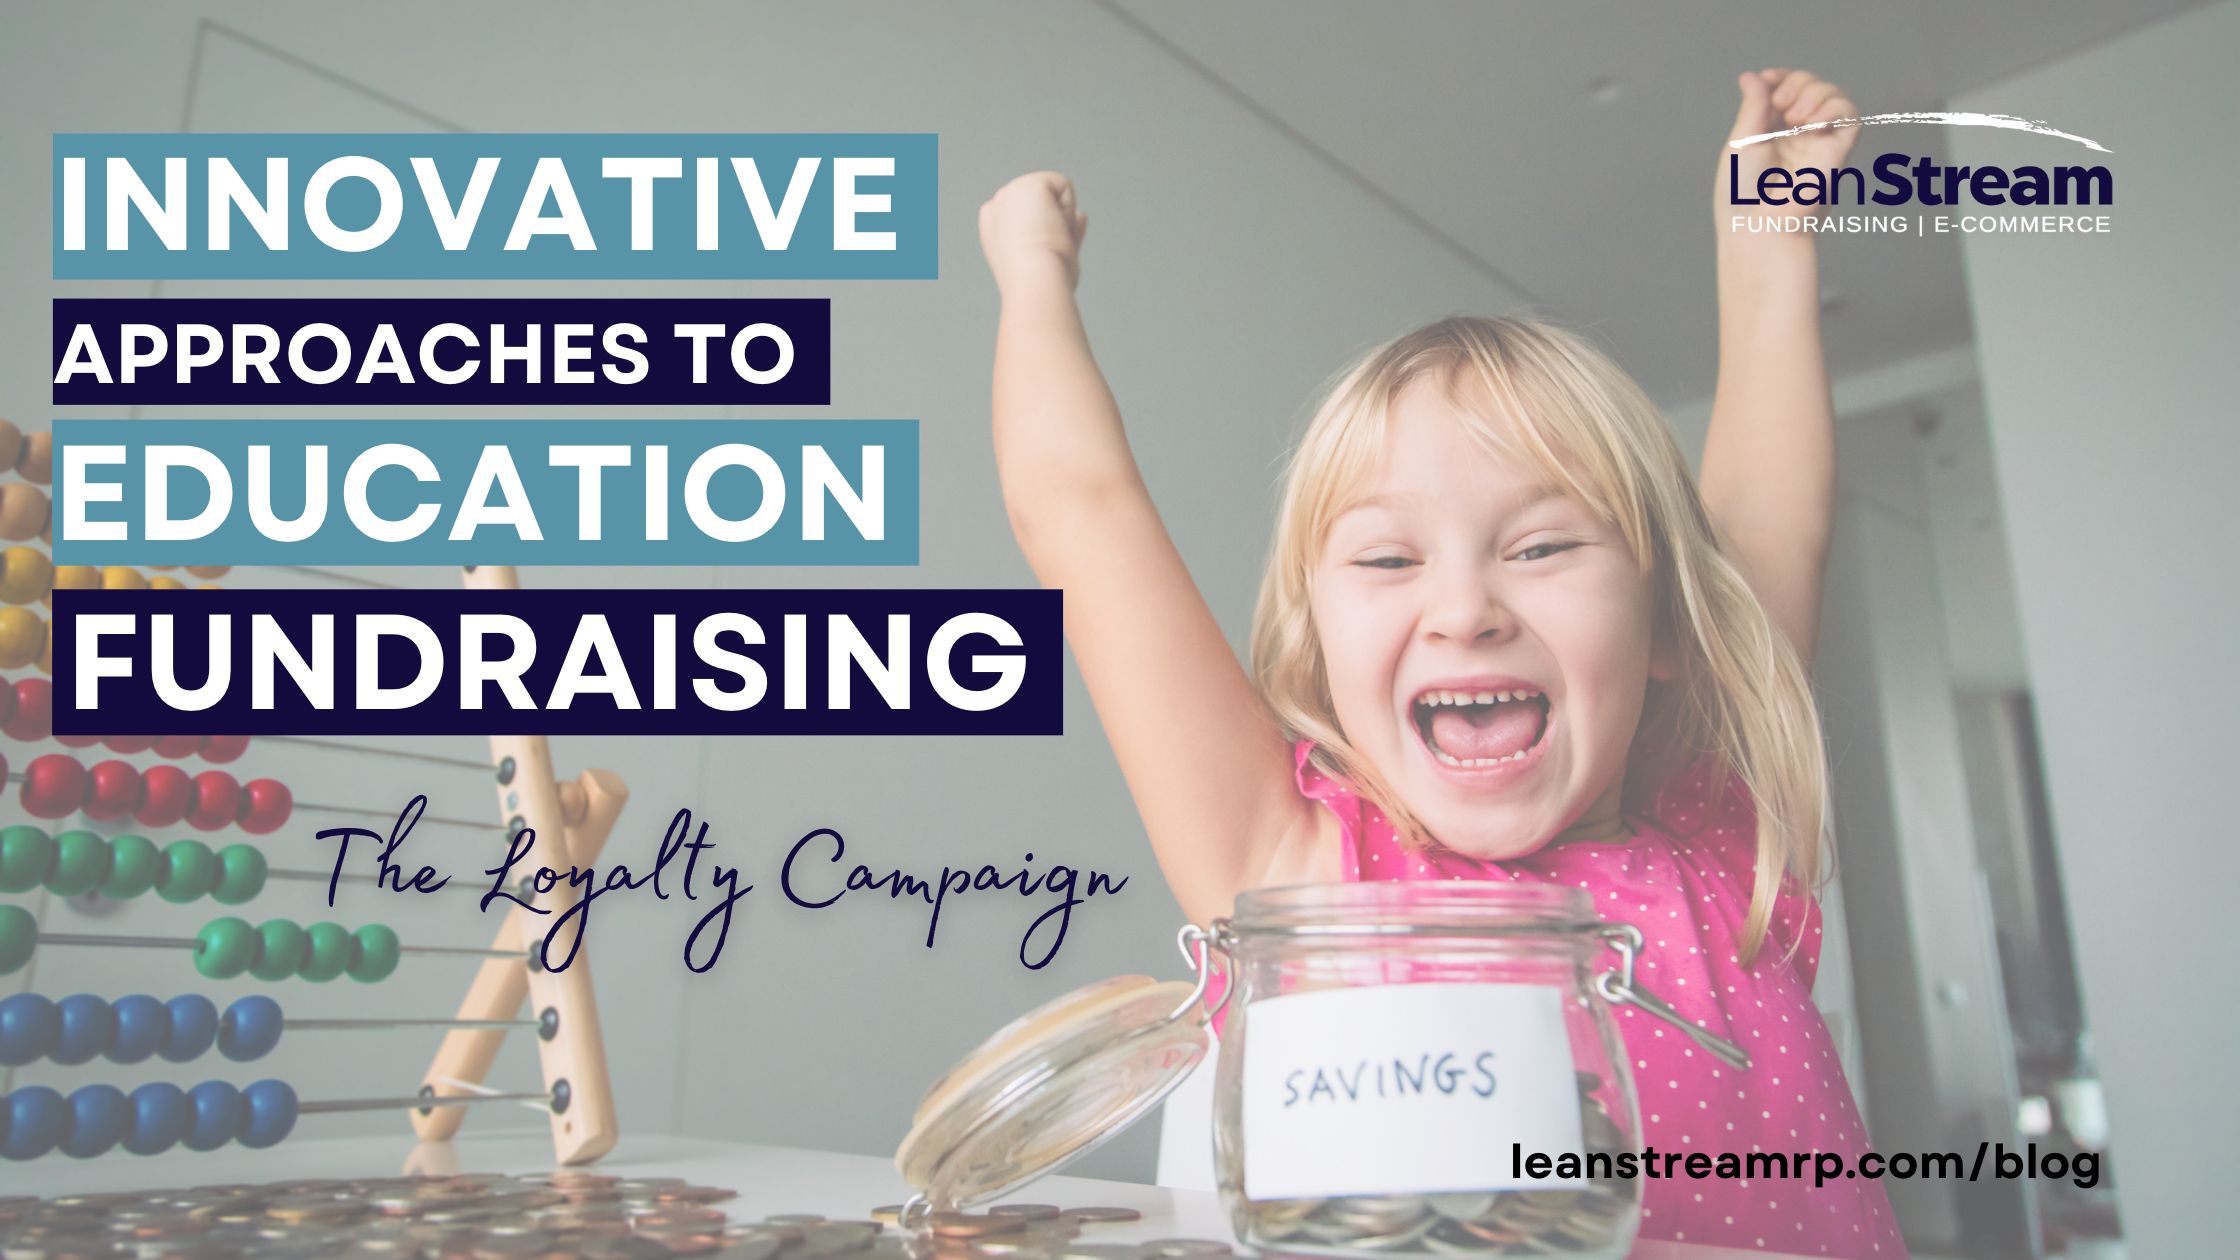 Loyalty Campaign for School Fundraising